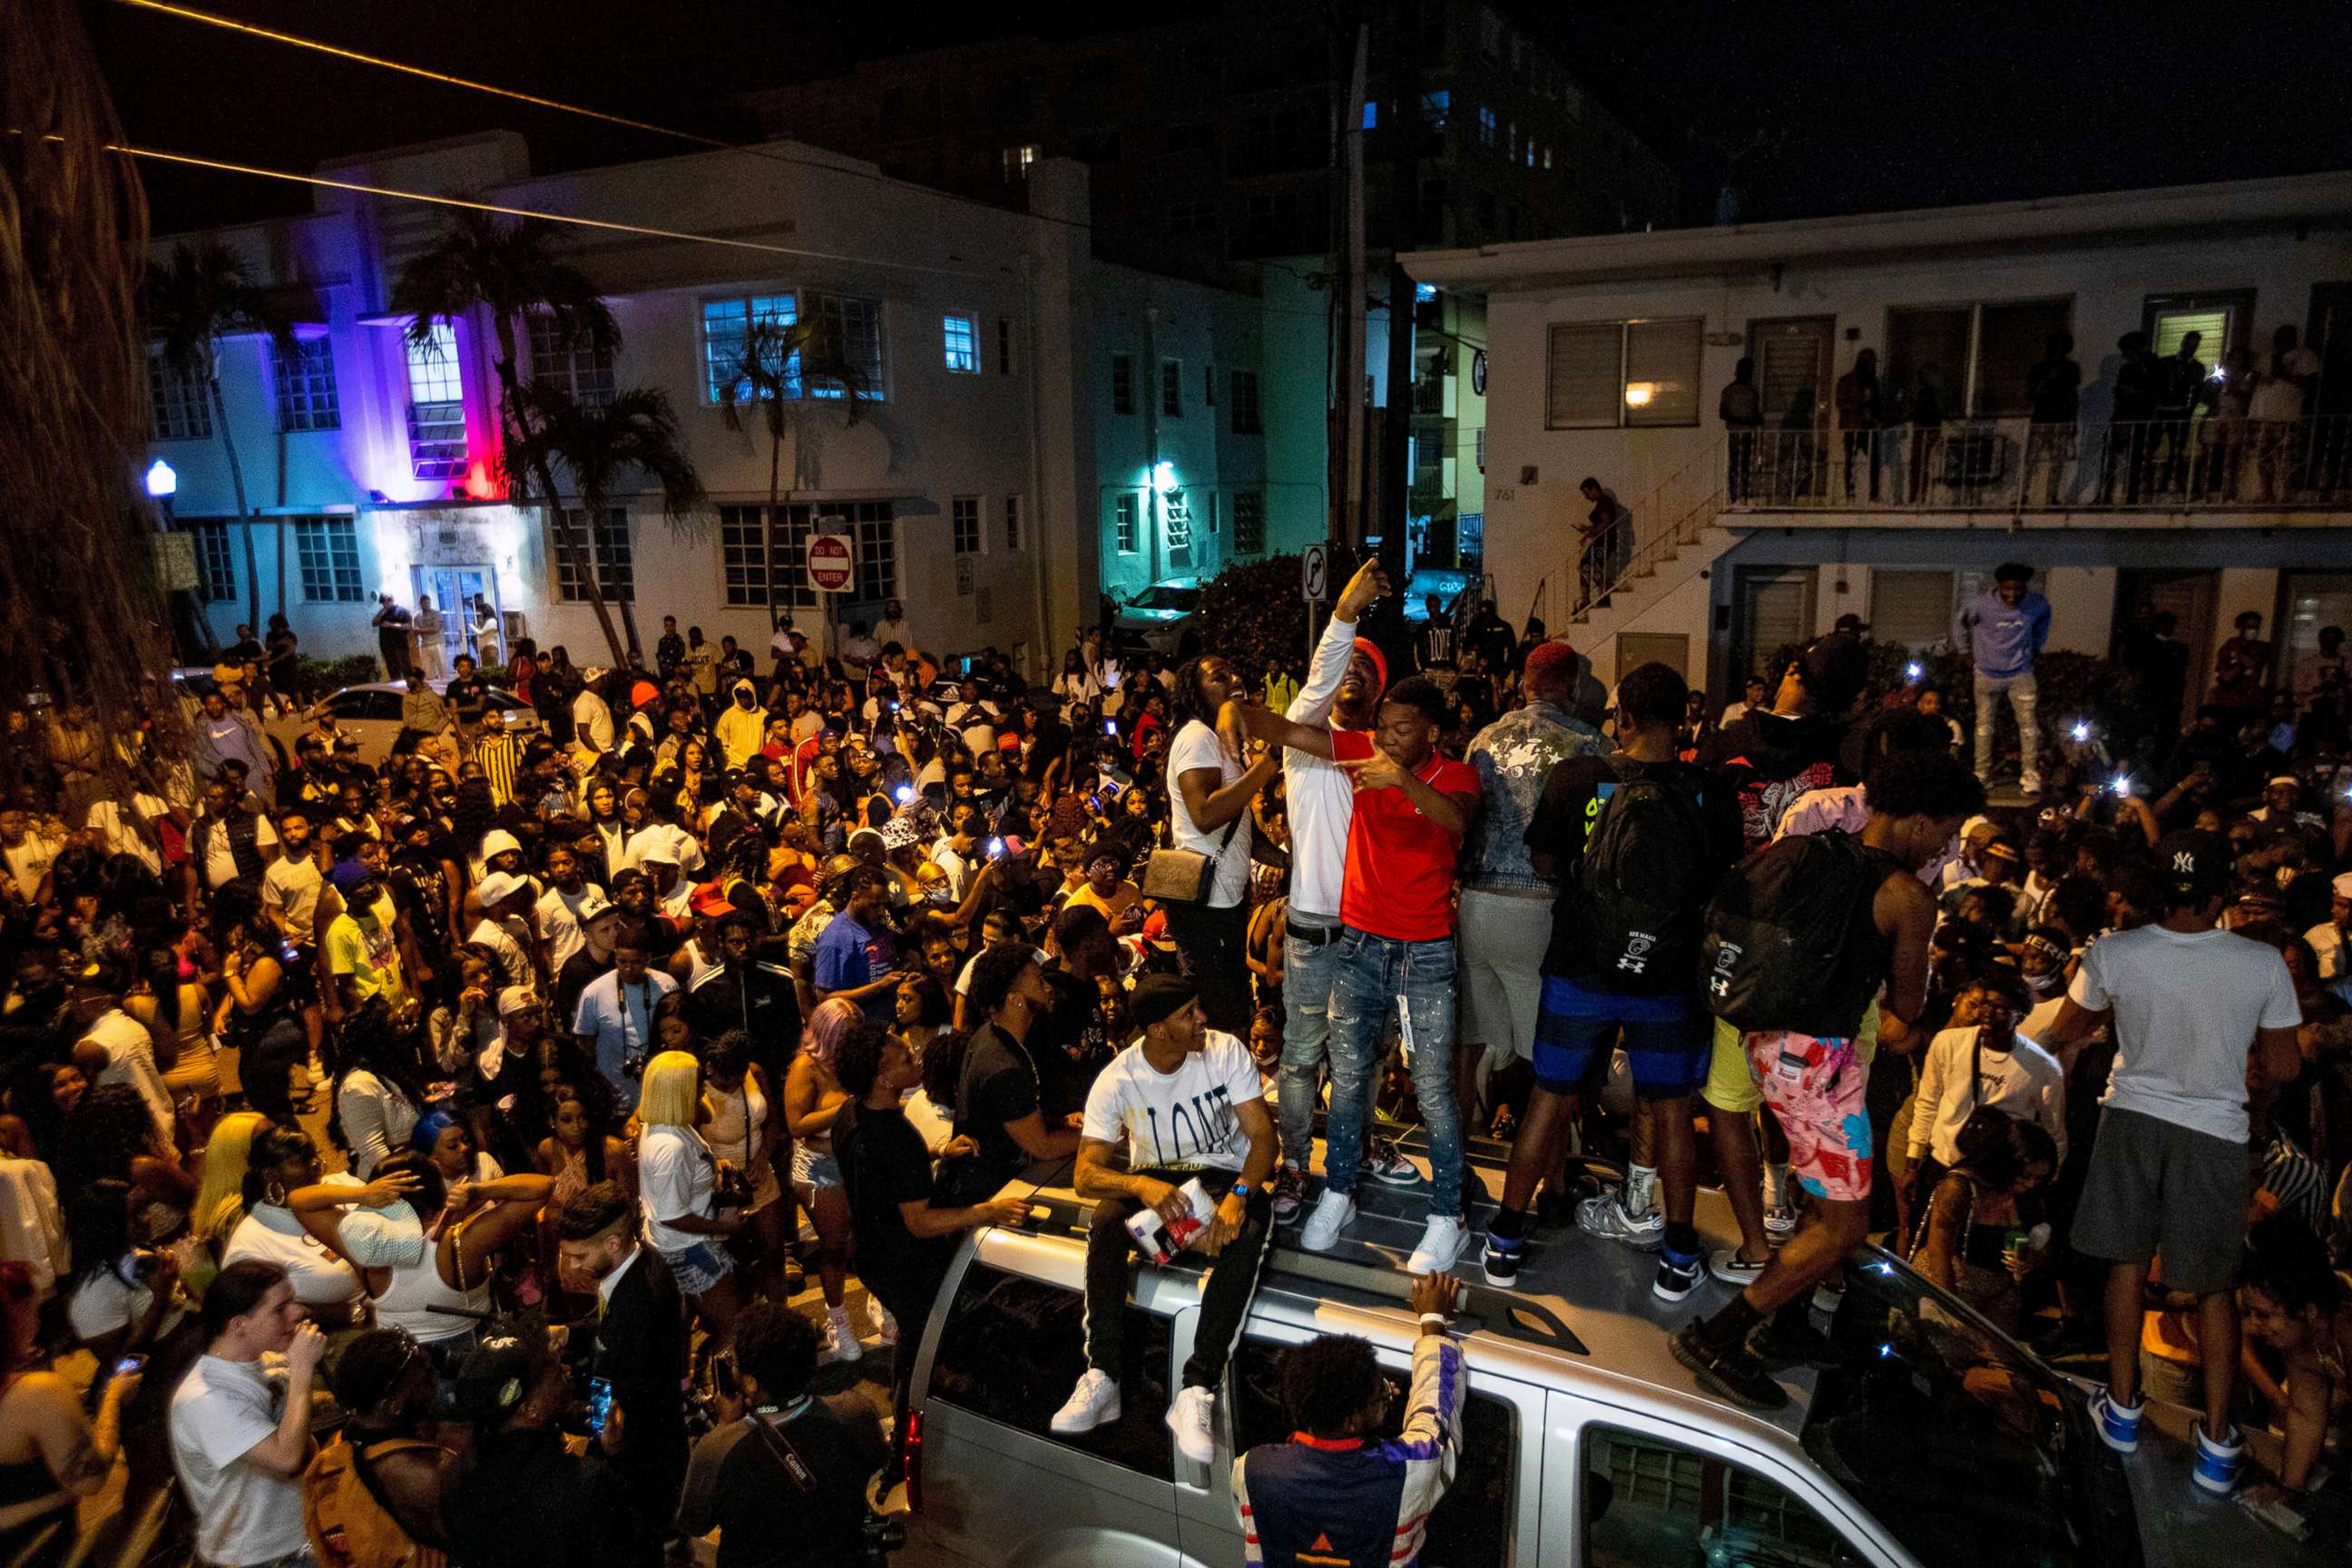 PHOTO: Crowds defiantly gather in the street while a speaker blasts music an hour past curfew in Miami Beach, Fla., March 21, 2021.